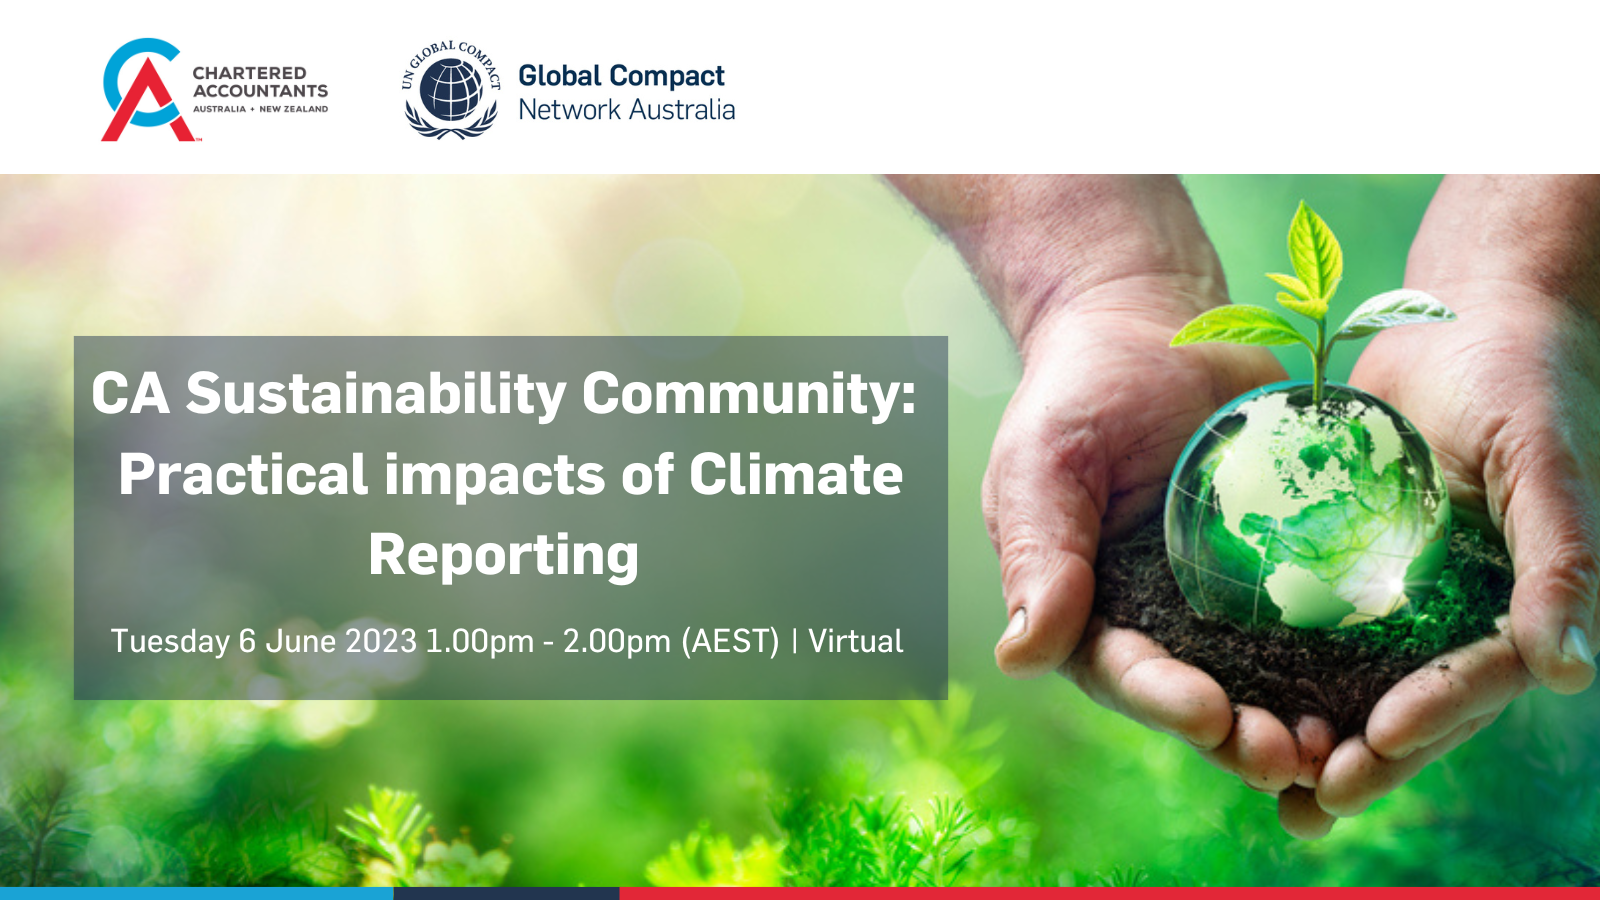 Webinar | Practical impacts of Climate Reporting with Chartered Accountants ANZ